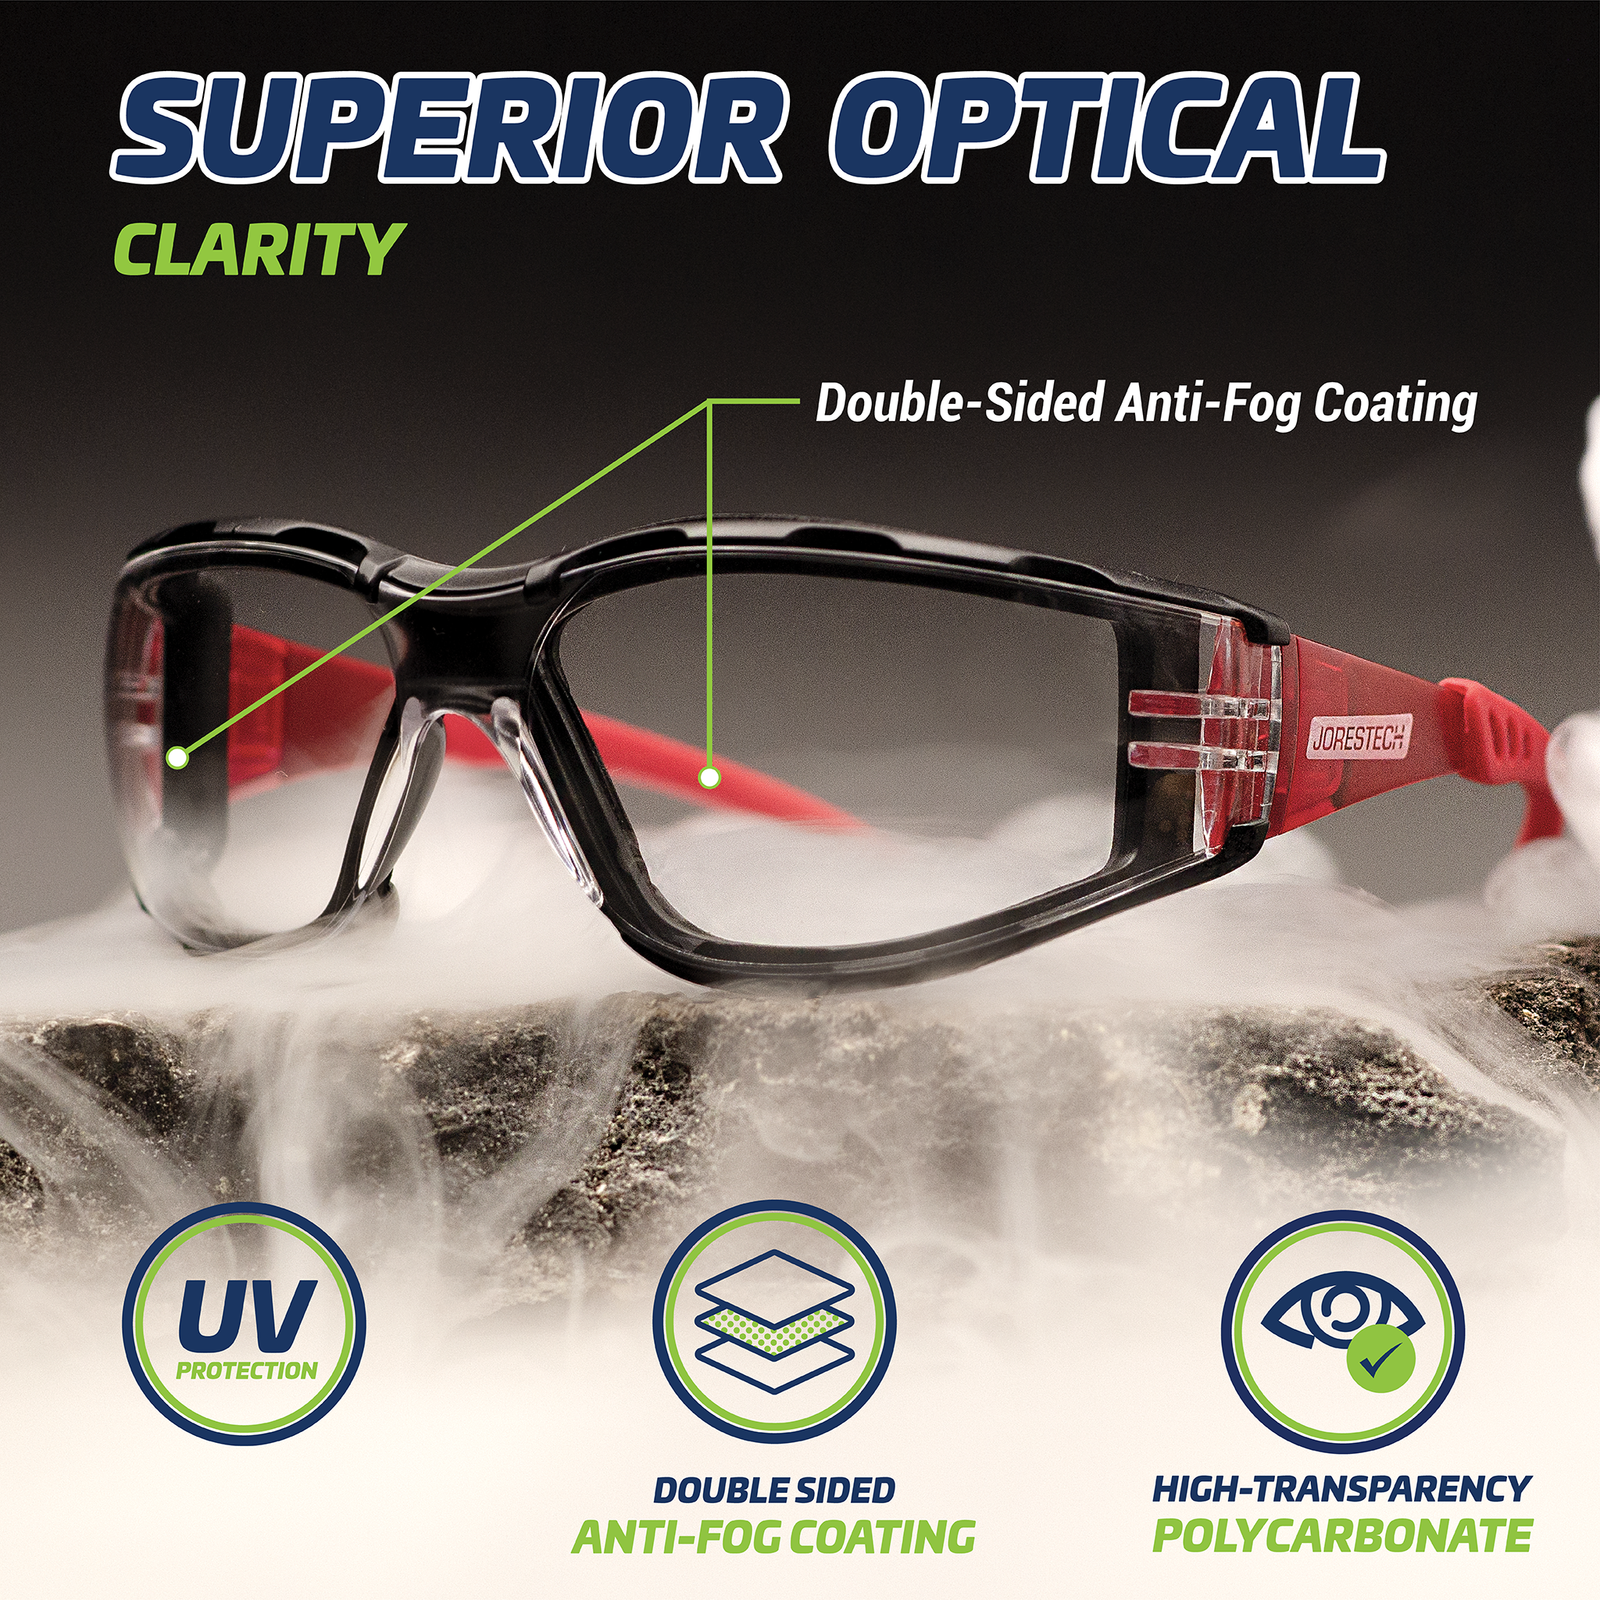 Features the red and clear JORESTECH safety glasses on top of a rock and surrounded by water vapor to show glasses are anti fog. Text reads: superior optical clarity, Double sided anti fog coating, UV protection logo and high transparency logo.